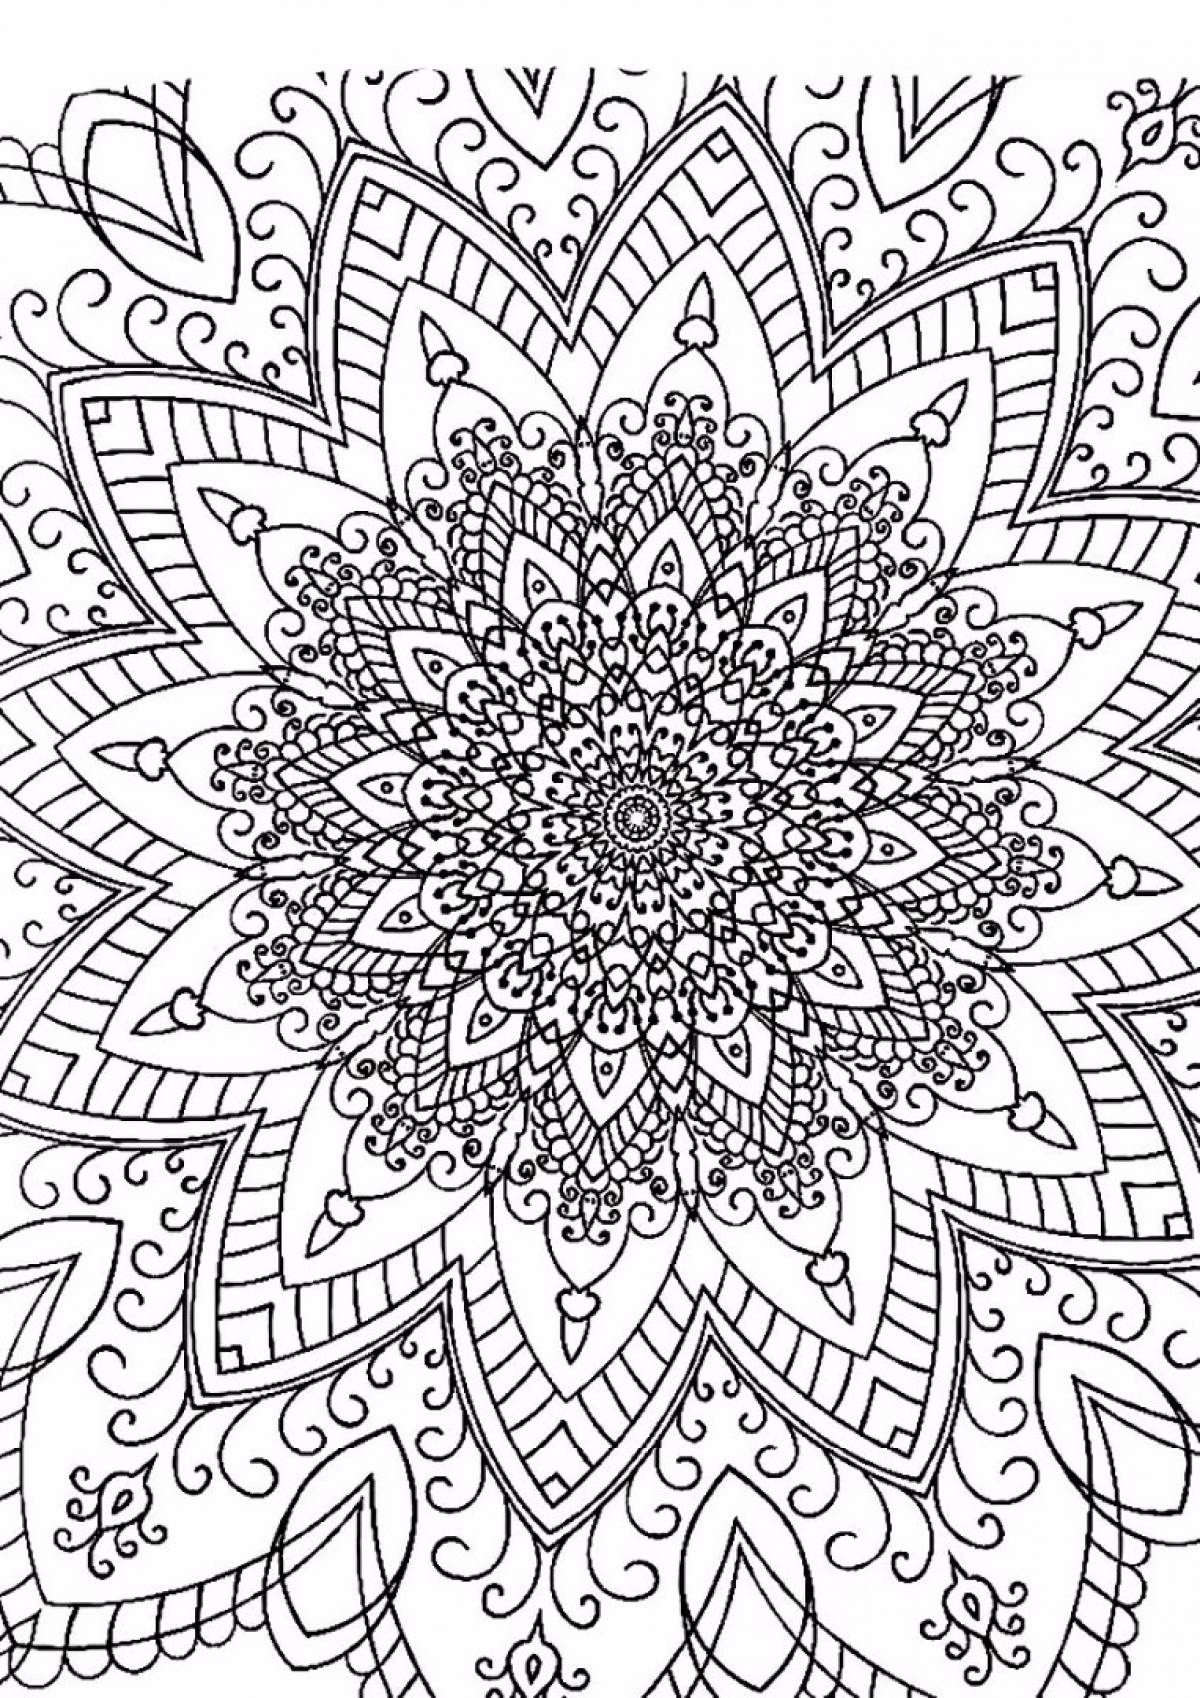 Antistress coloring page